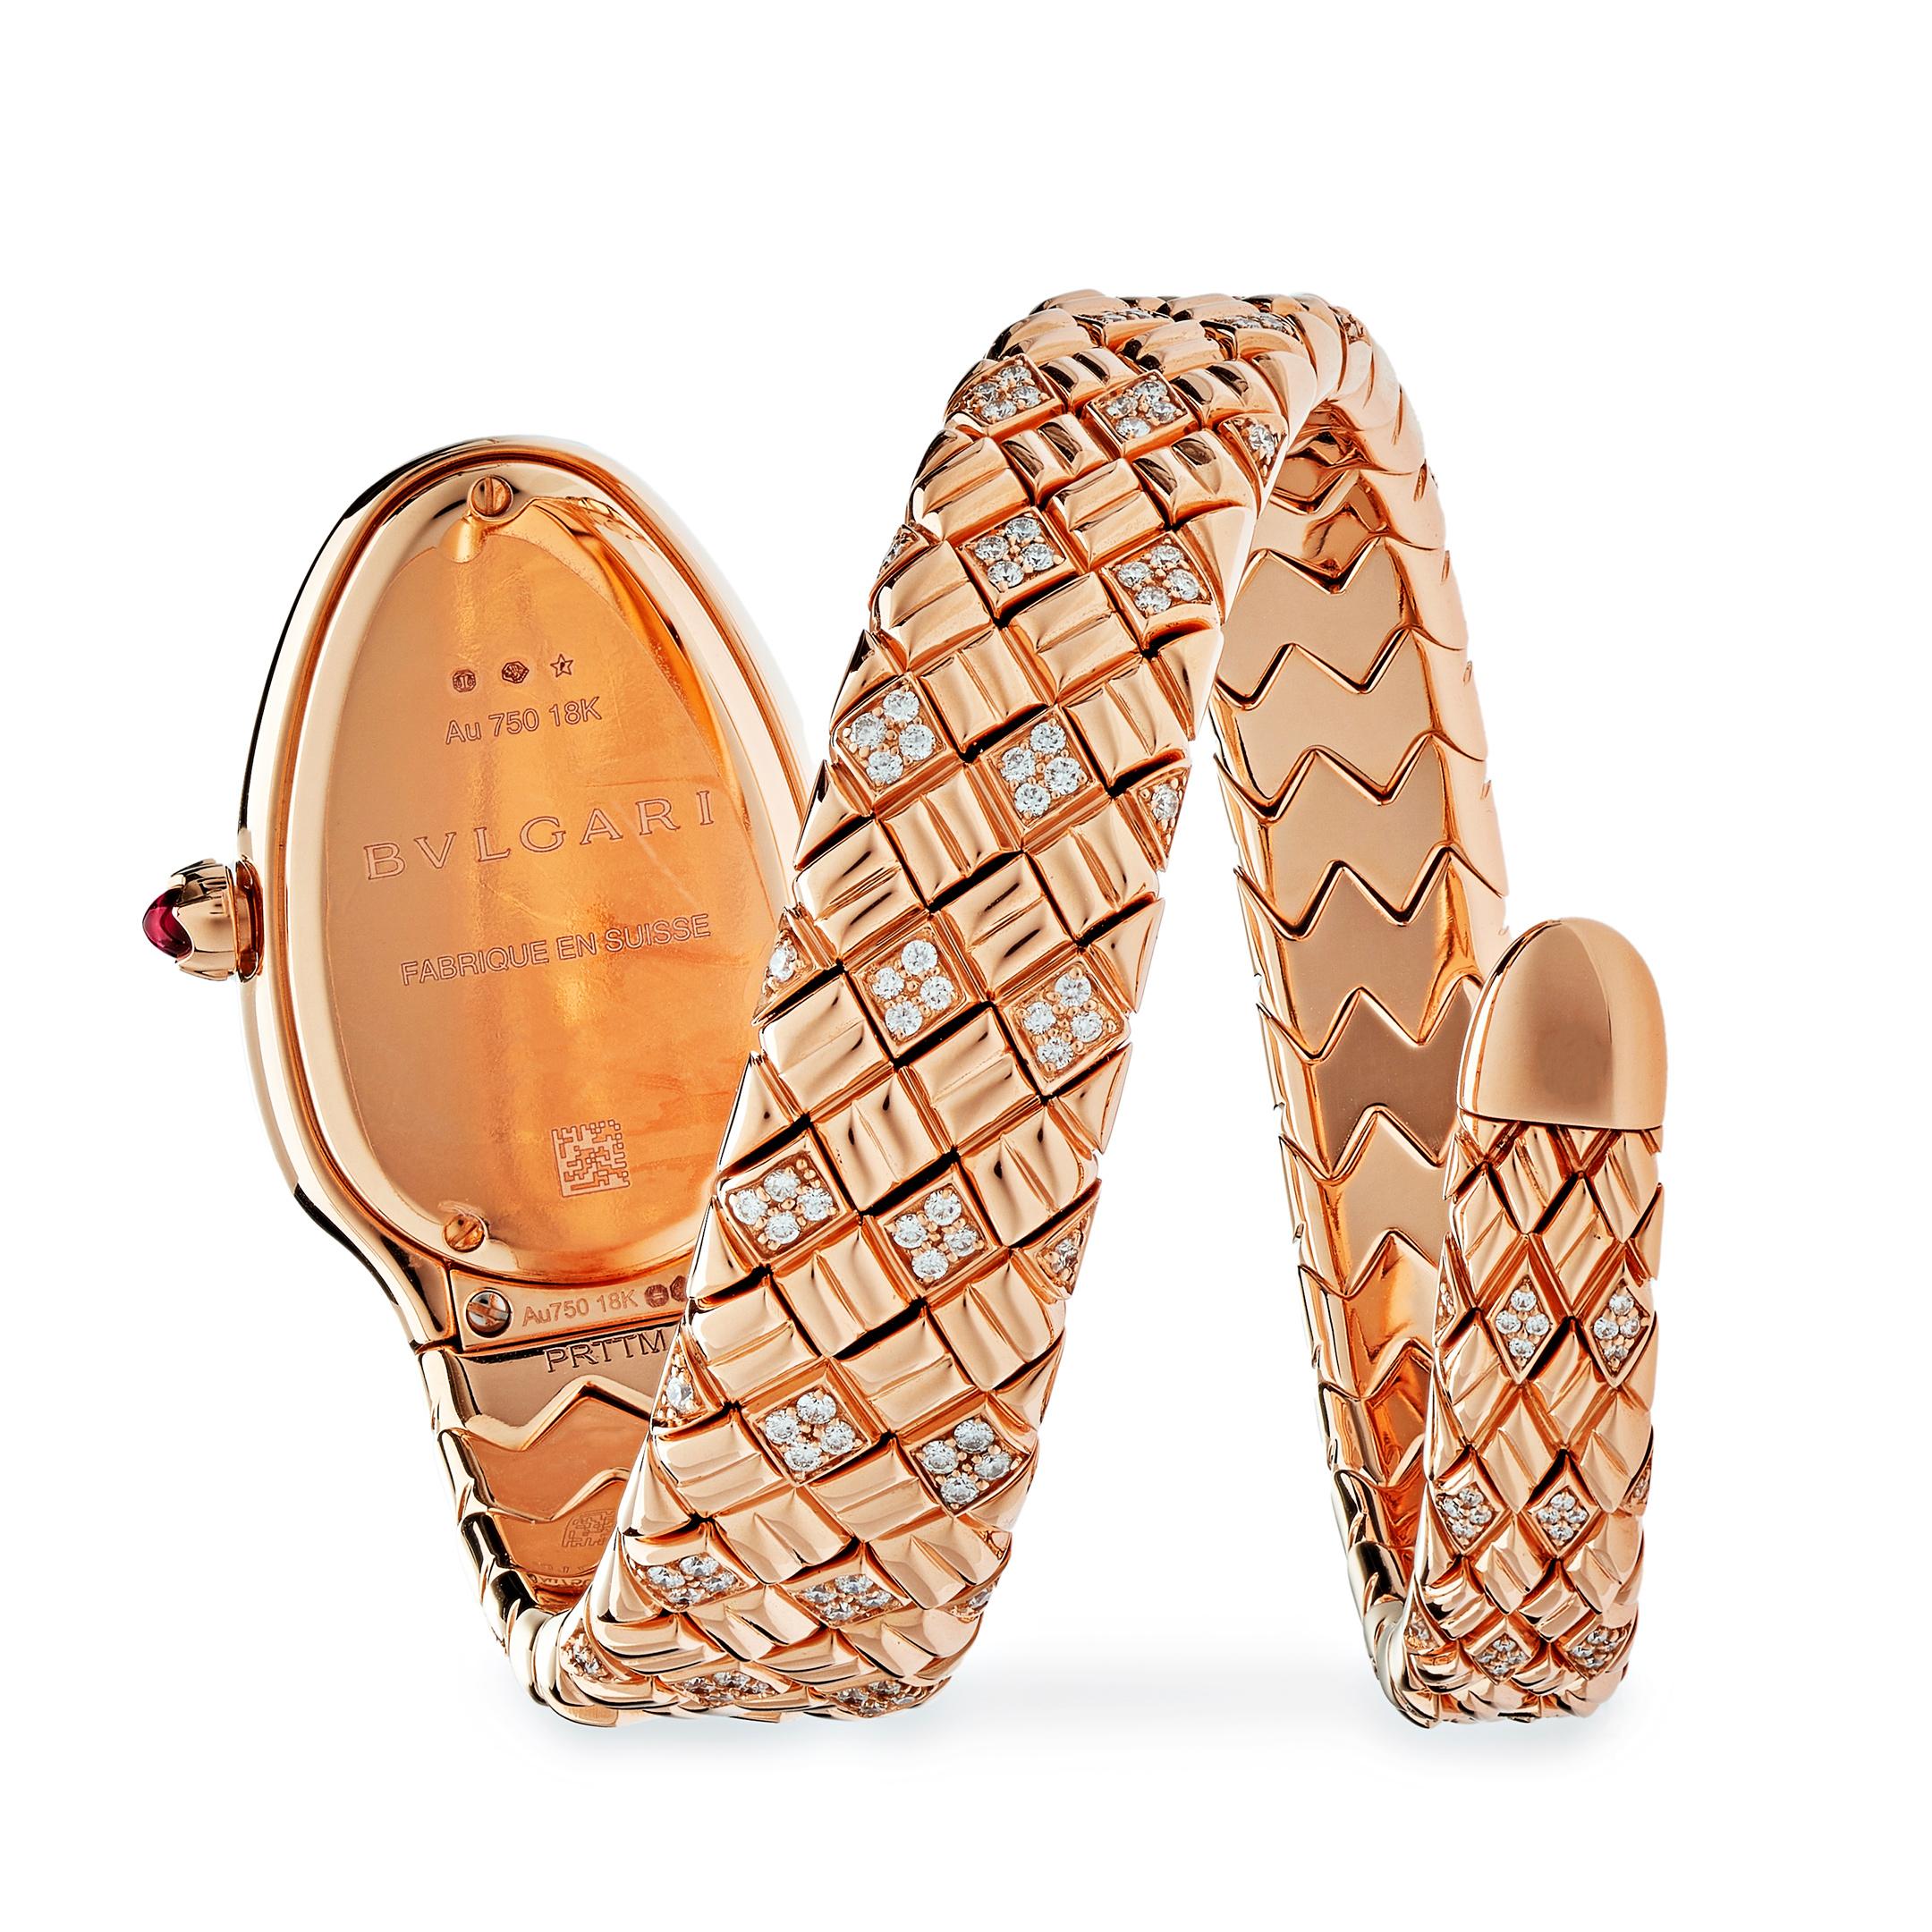 Combining the audacity of Serpenti and the legend of “spiga” (the Italian word for spike), the Serpenti Spiga single-spiral watch in 18 kt rose gold embellished with diamonds joins the modern with the ancient. 
This Serpenti Spiga watch features a